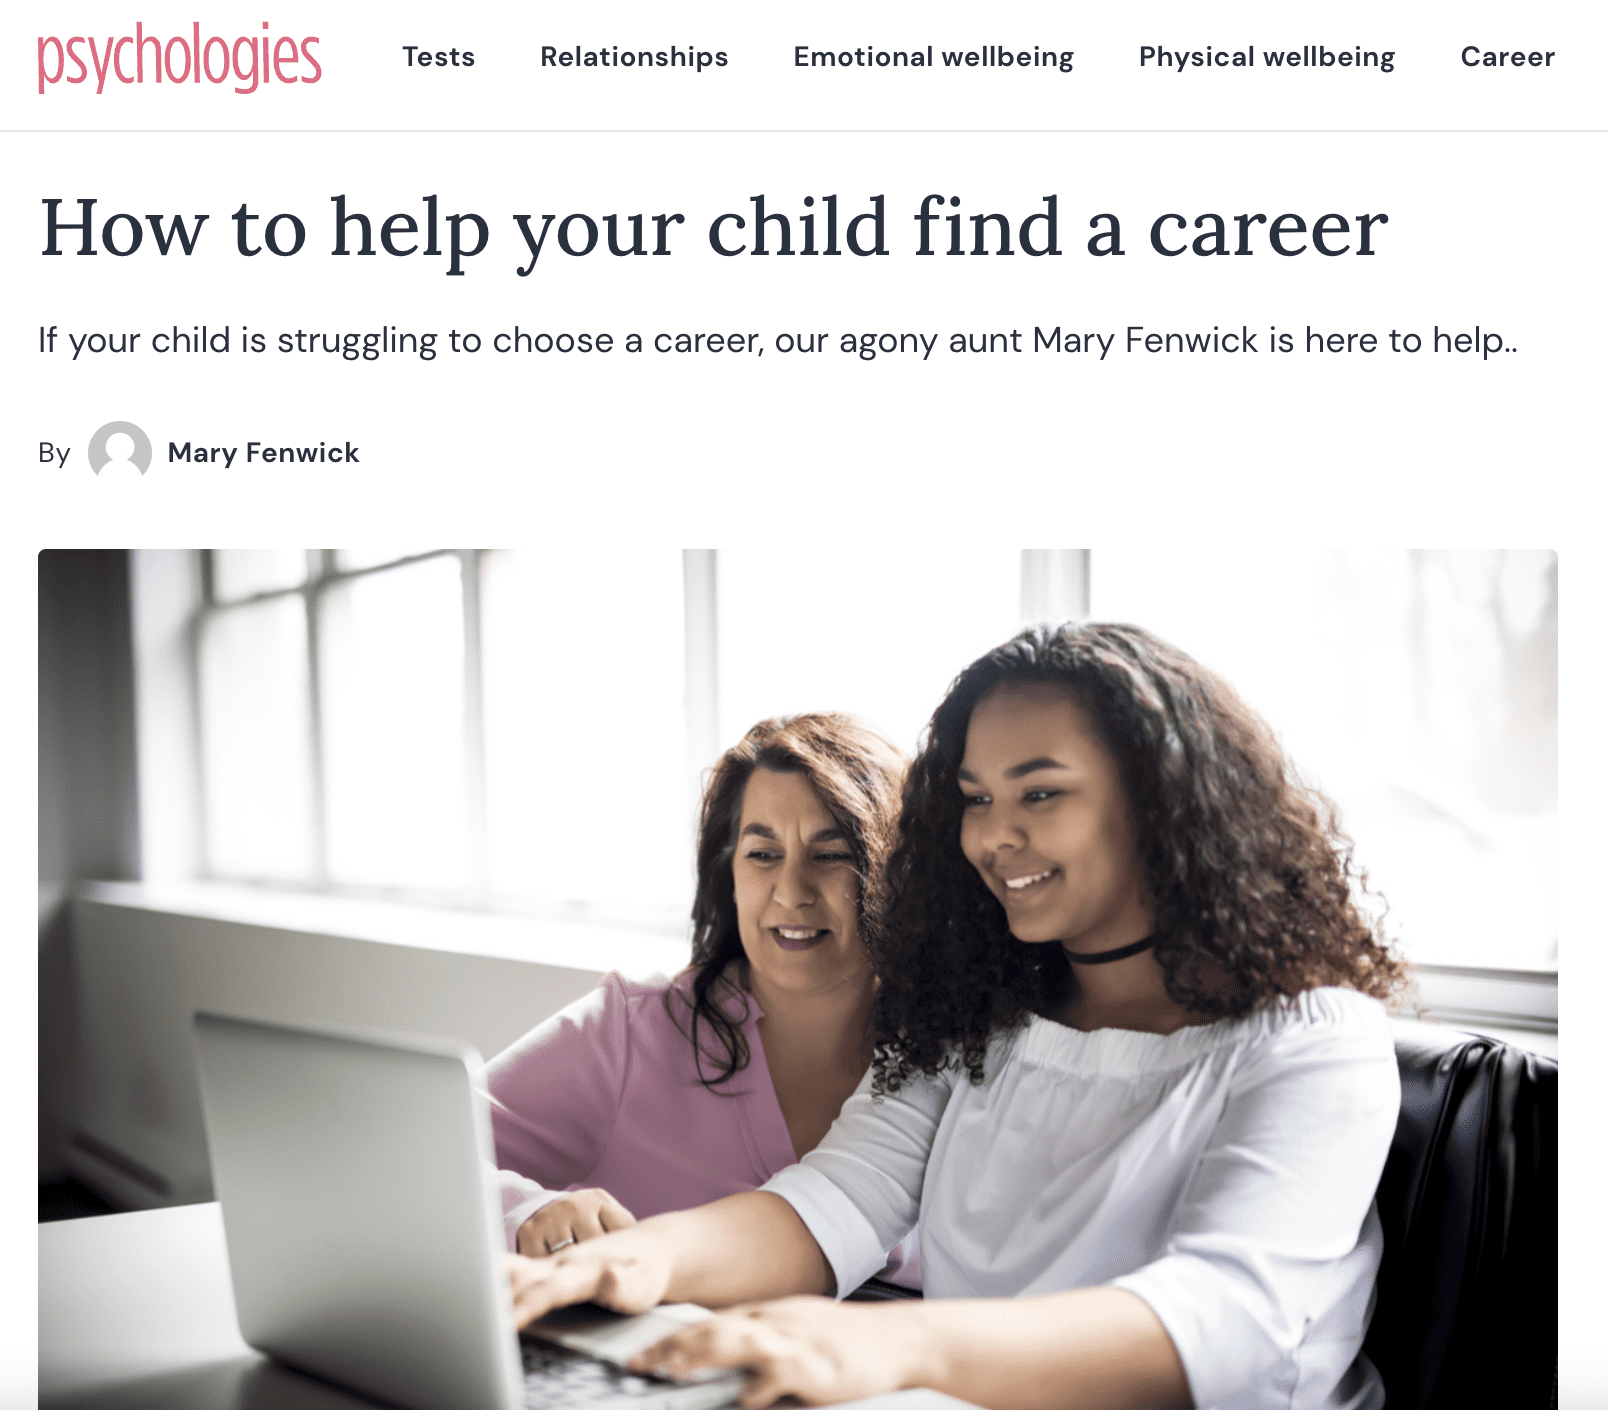 Psychologies Magazine - July 2022

It was a pleasure to speak to Mary Fenwick, the then “Agony Aunt” for  Psychologies Magazine about “How to help your child find a career”. This was based on a specific question posed by a reader and hopefully the answer is beneficial to any parents keen to positively support their child when it comes to careers and next steps.